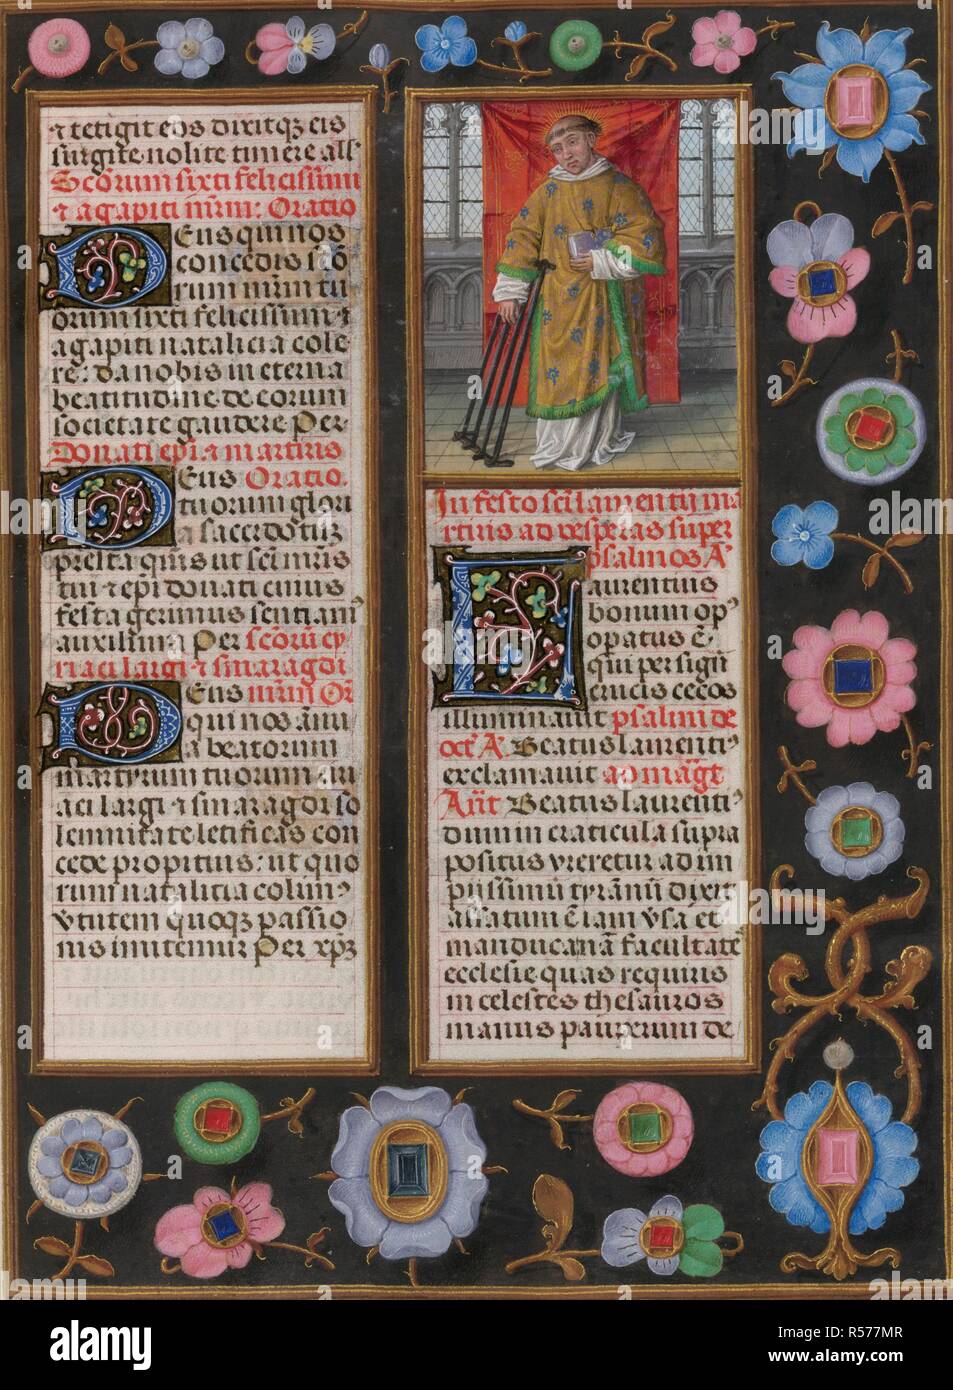 The Sanctorale; Feast of St.Lawrence, 10th August. The saint with his gridiron. Text with decorated initial 'L'. Borders of trompe l'oeil decoration with flowers. Isabella Breviary. S. Netherlands [Bruges?]; circa 1490-1497. Source: Add. 18851, f.431. Language: Latin. Author: Master of James IV of Scotland. Stock Photo